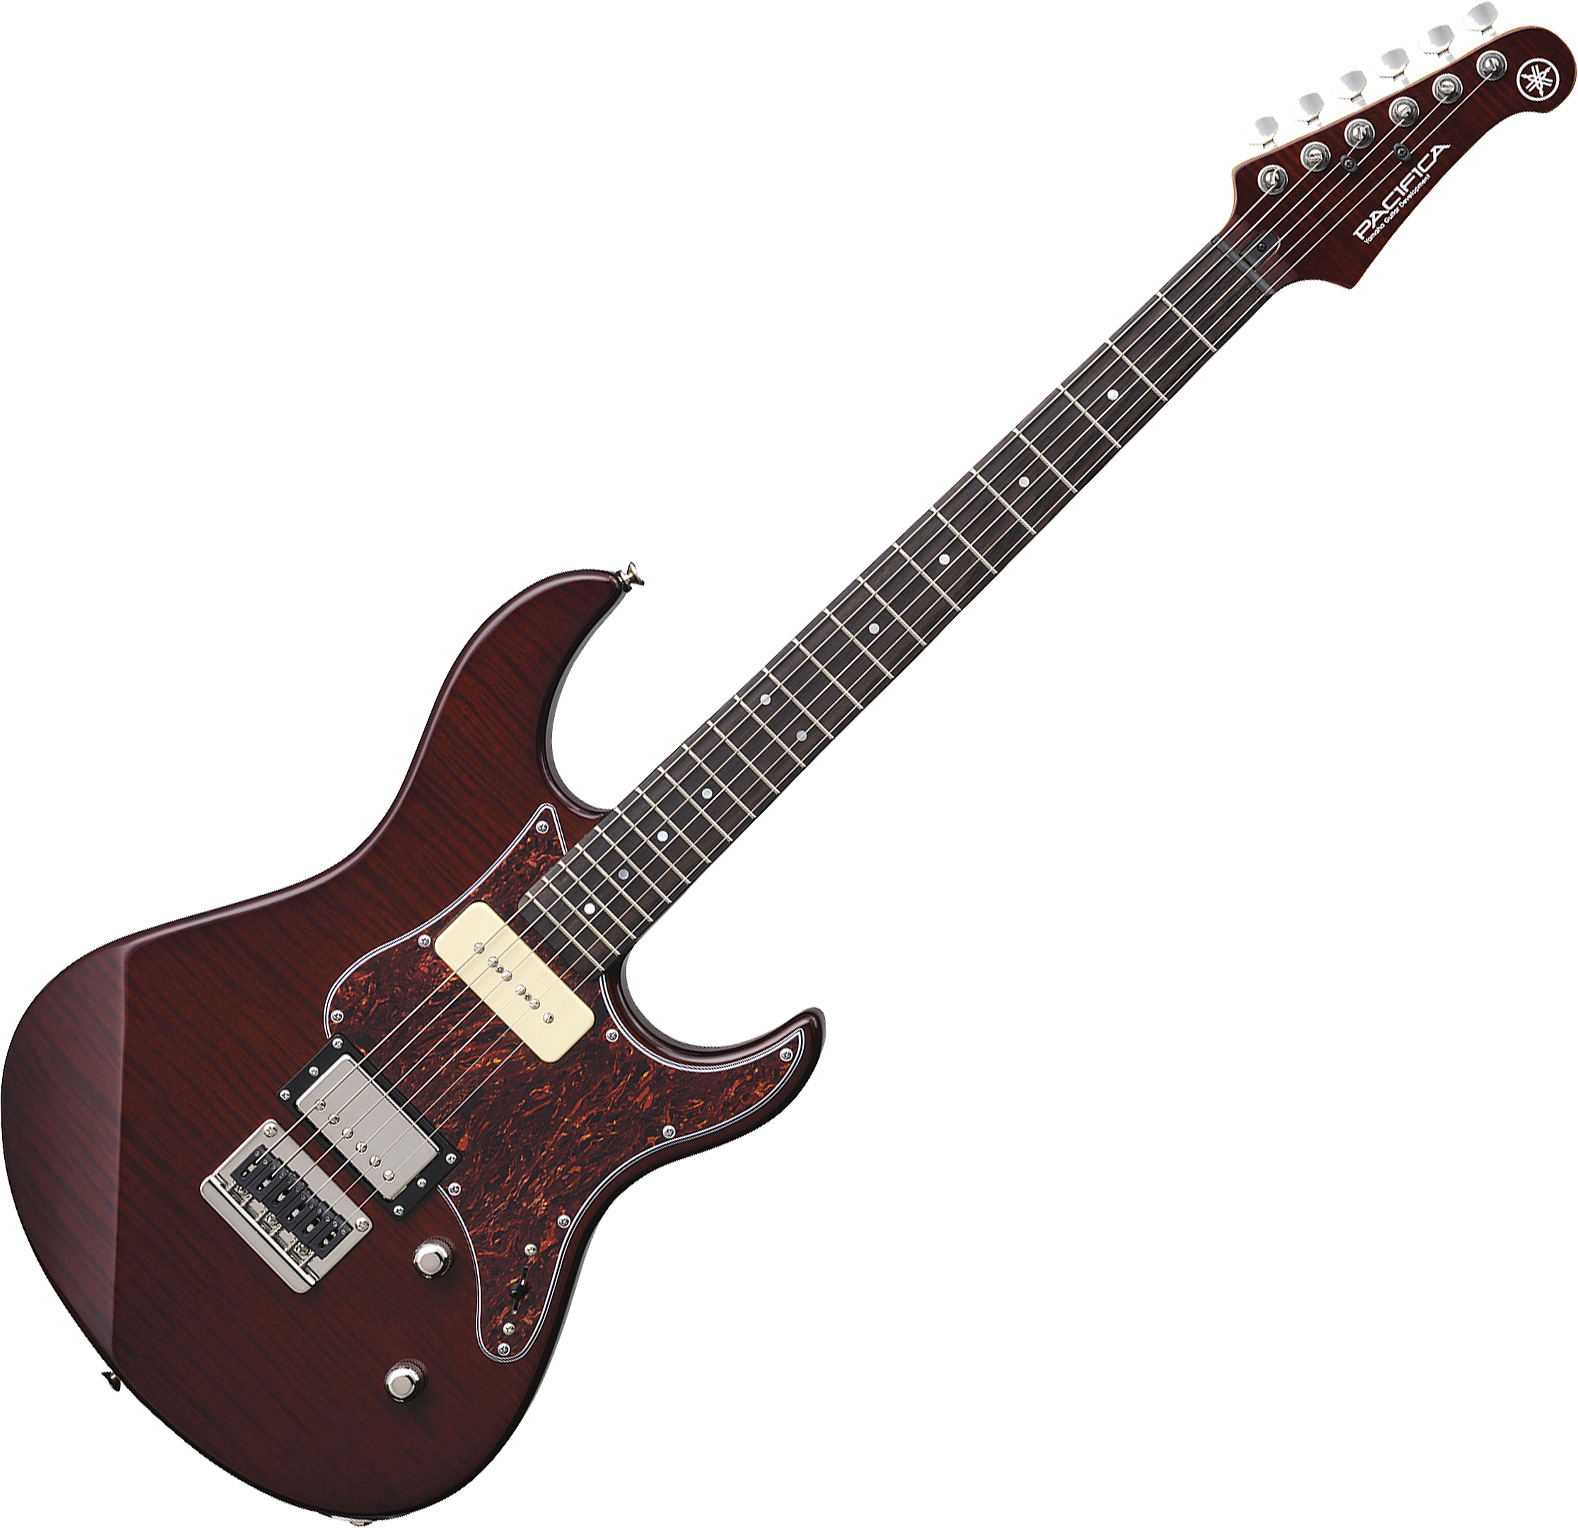 Yamaha Pacifica Pac611hfm Rb Rw - Root Beer - Guitare Électrique Forme Str - Variation 4